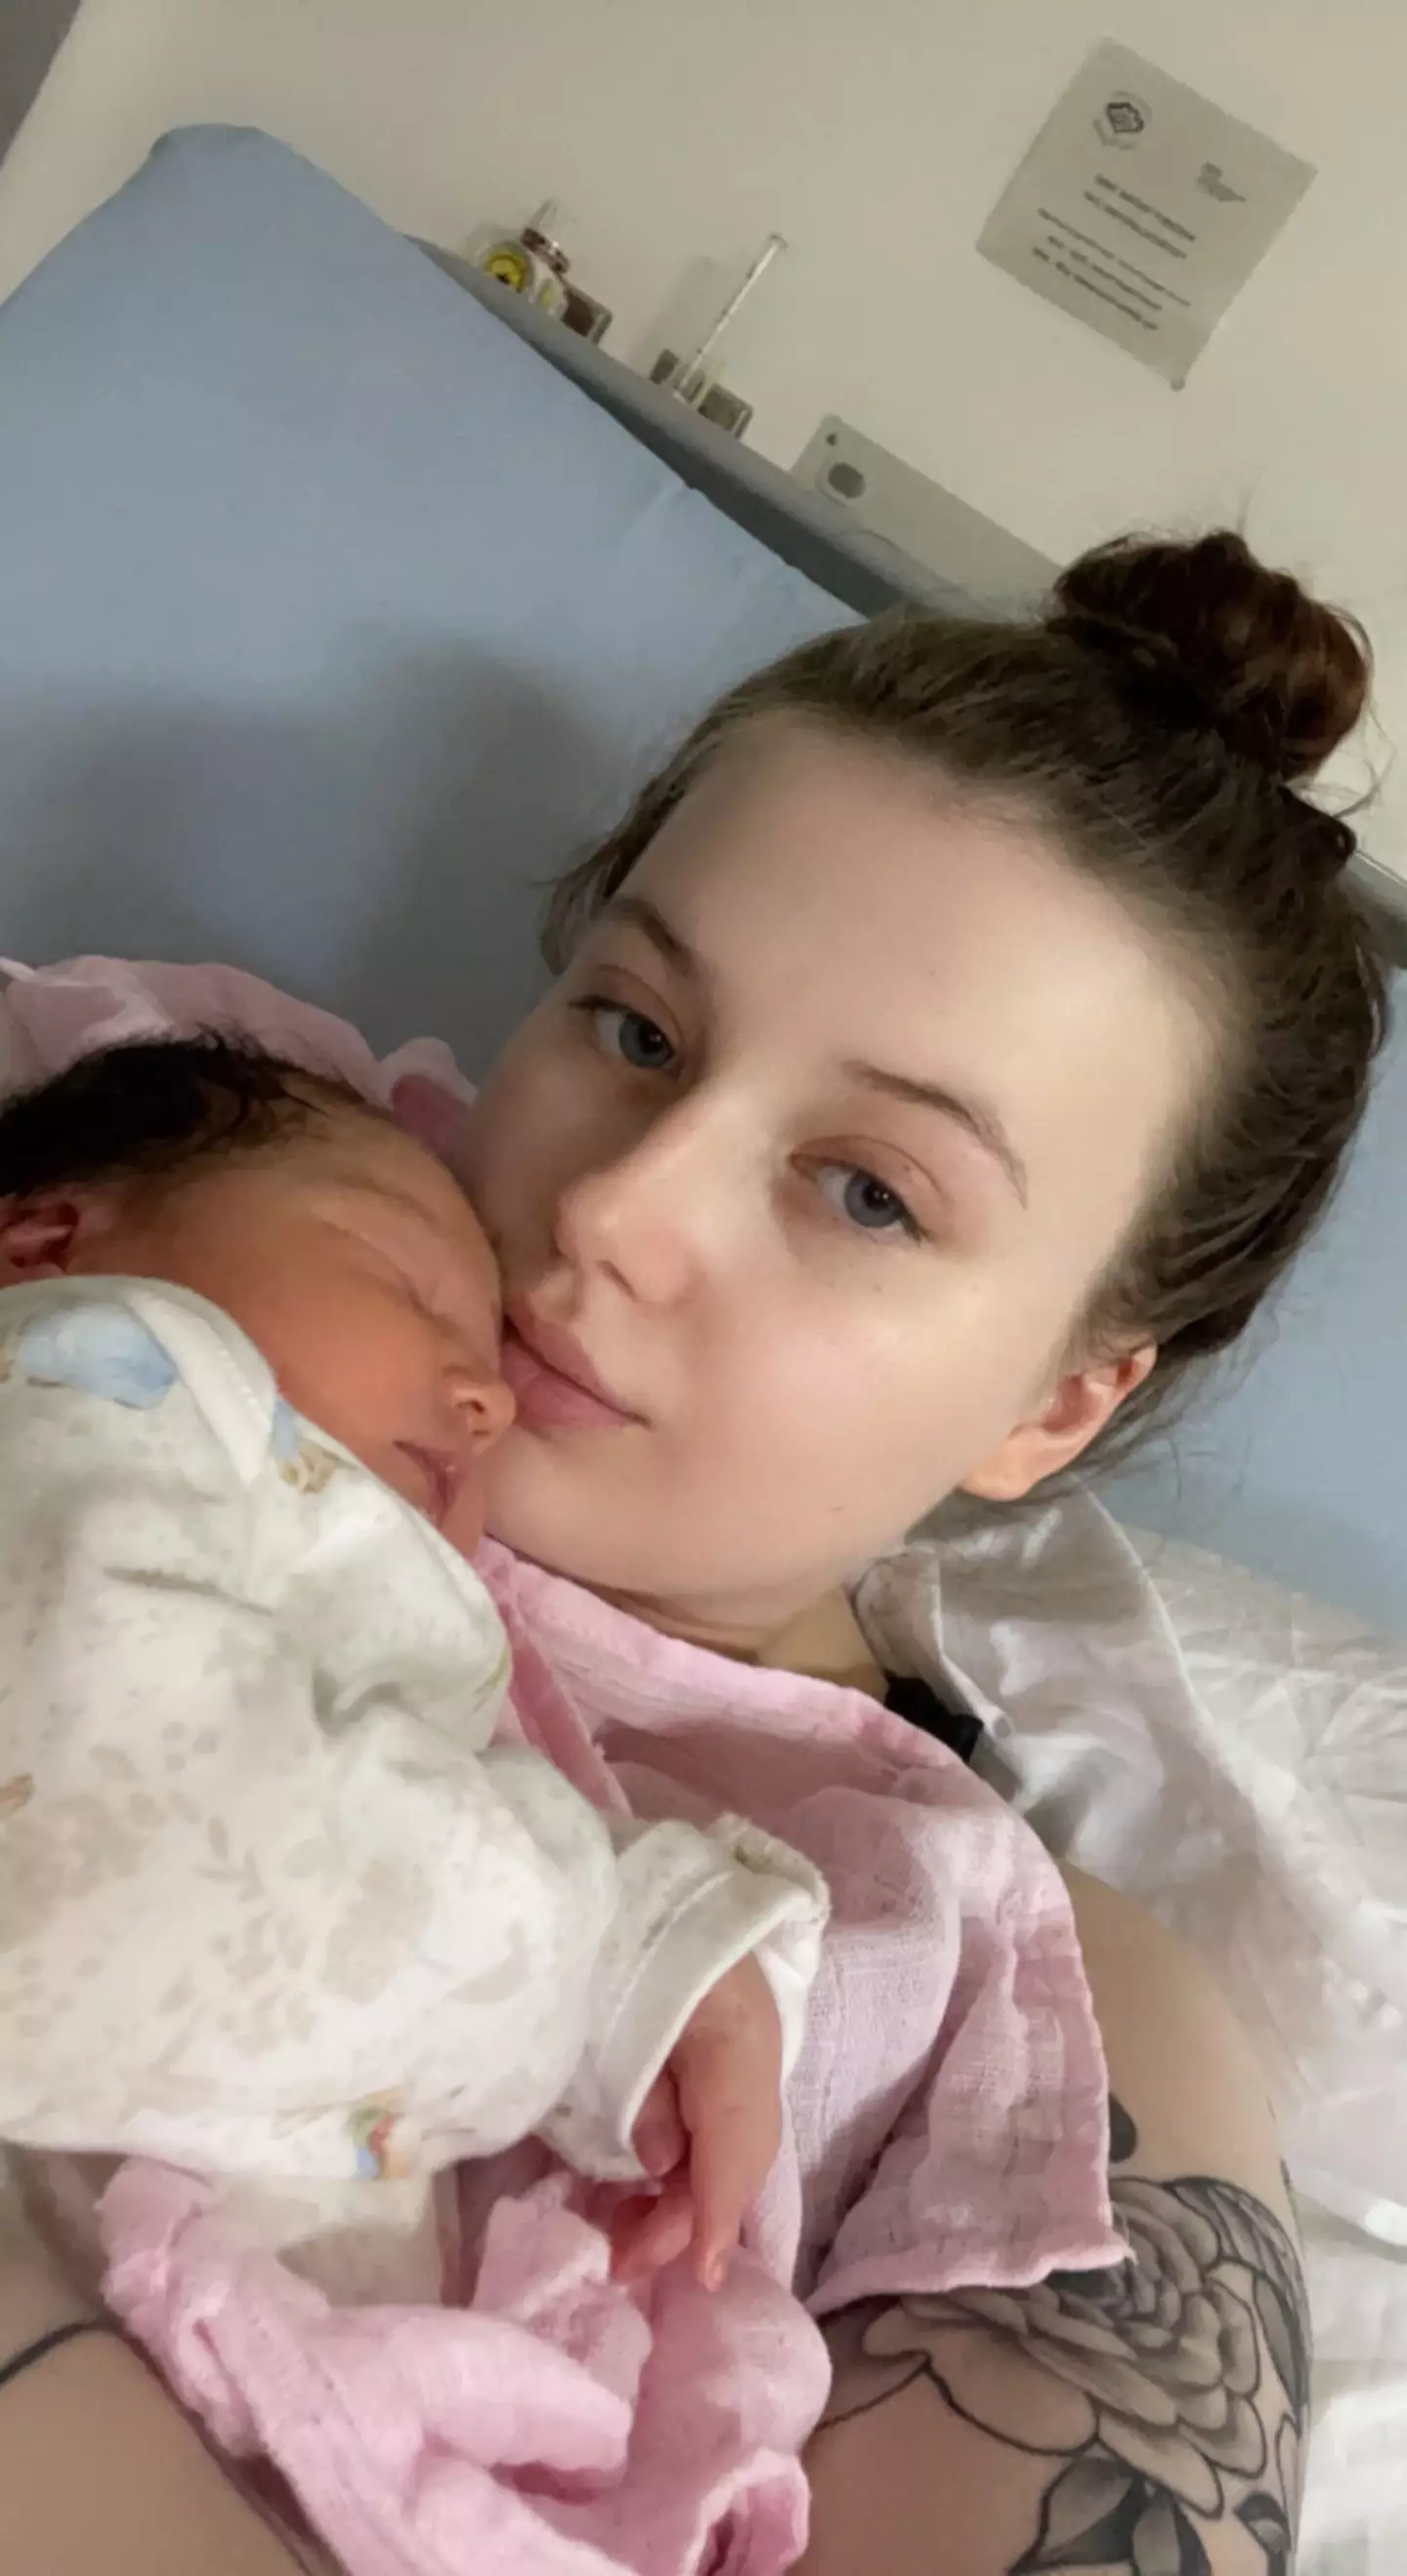 Grace shared a video of her month-old daughter Emilia.